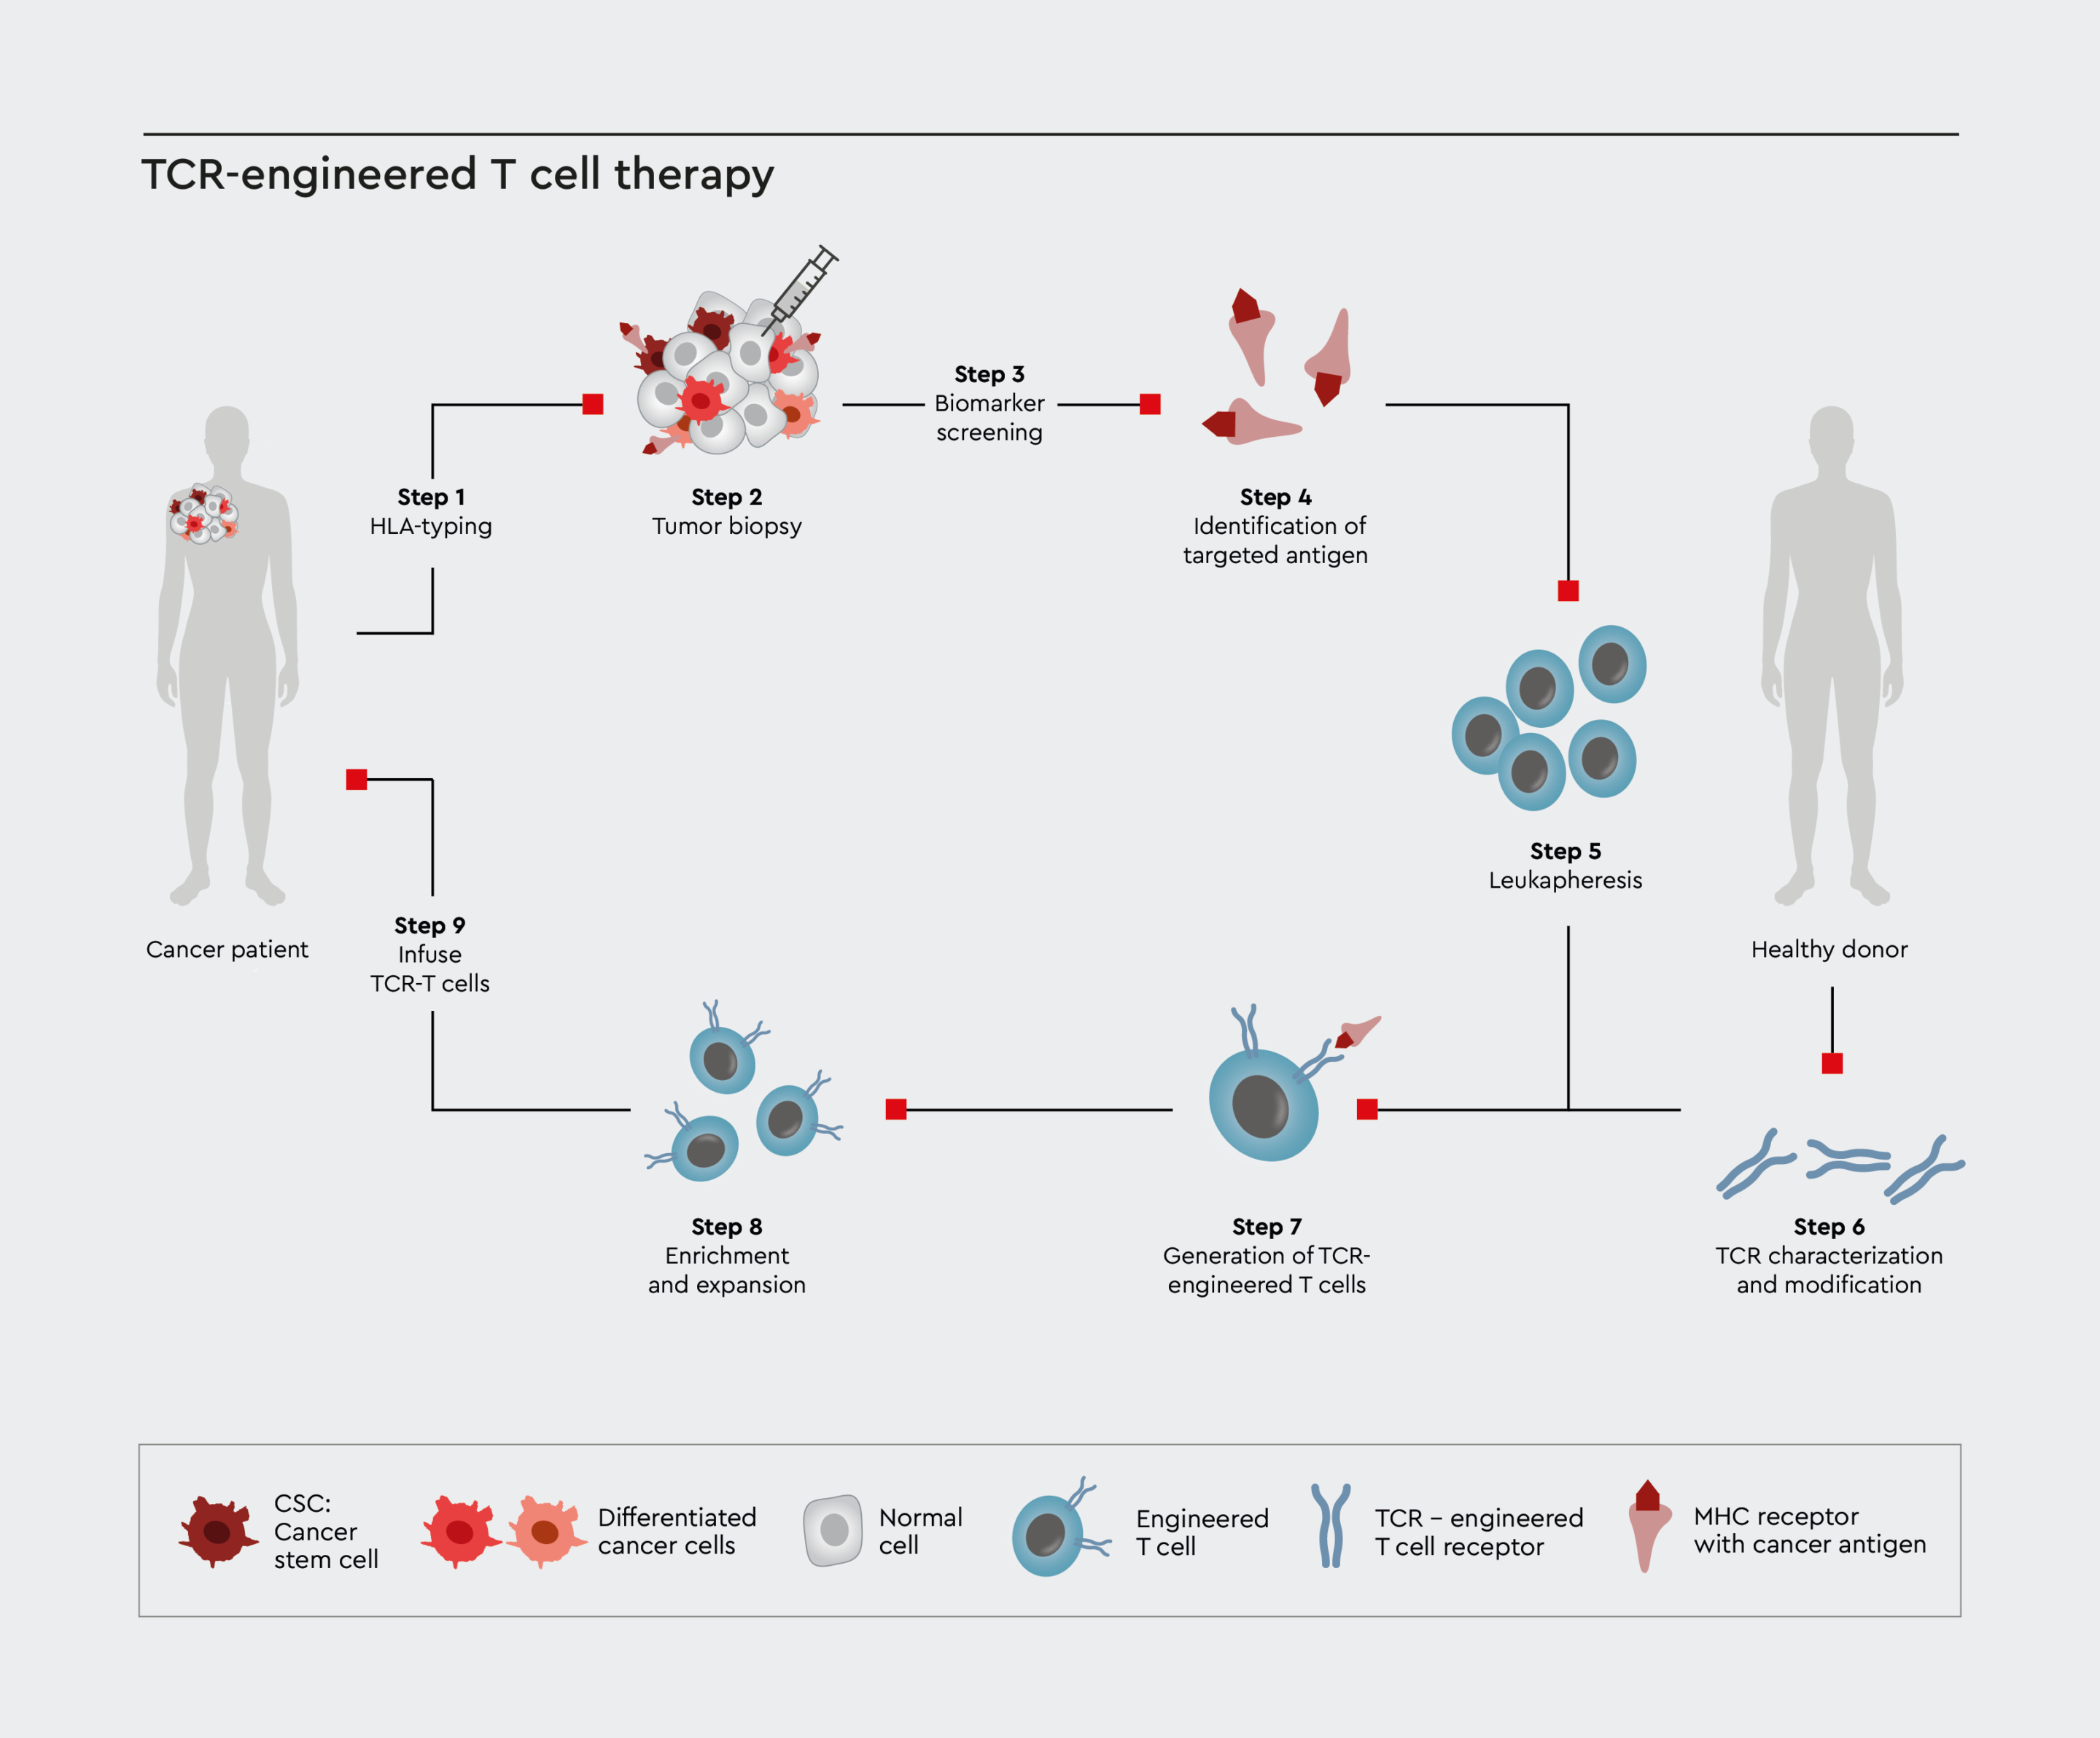 TCR-engineered T cell therapy